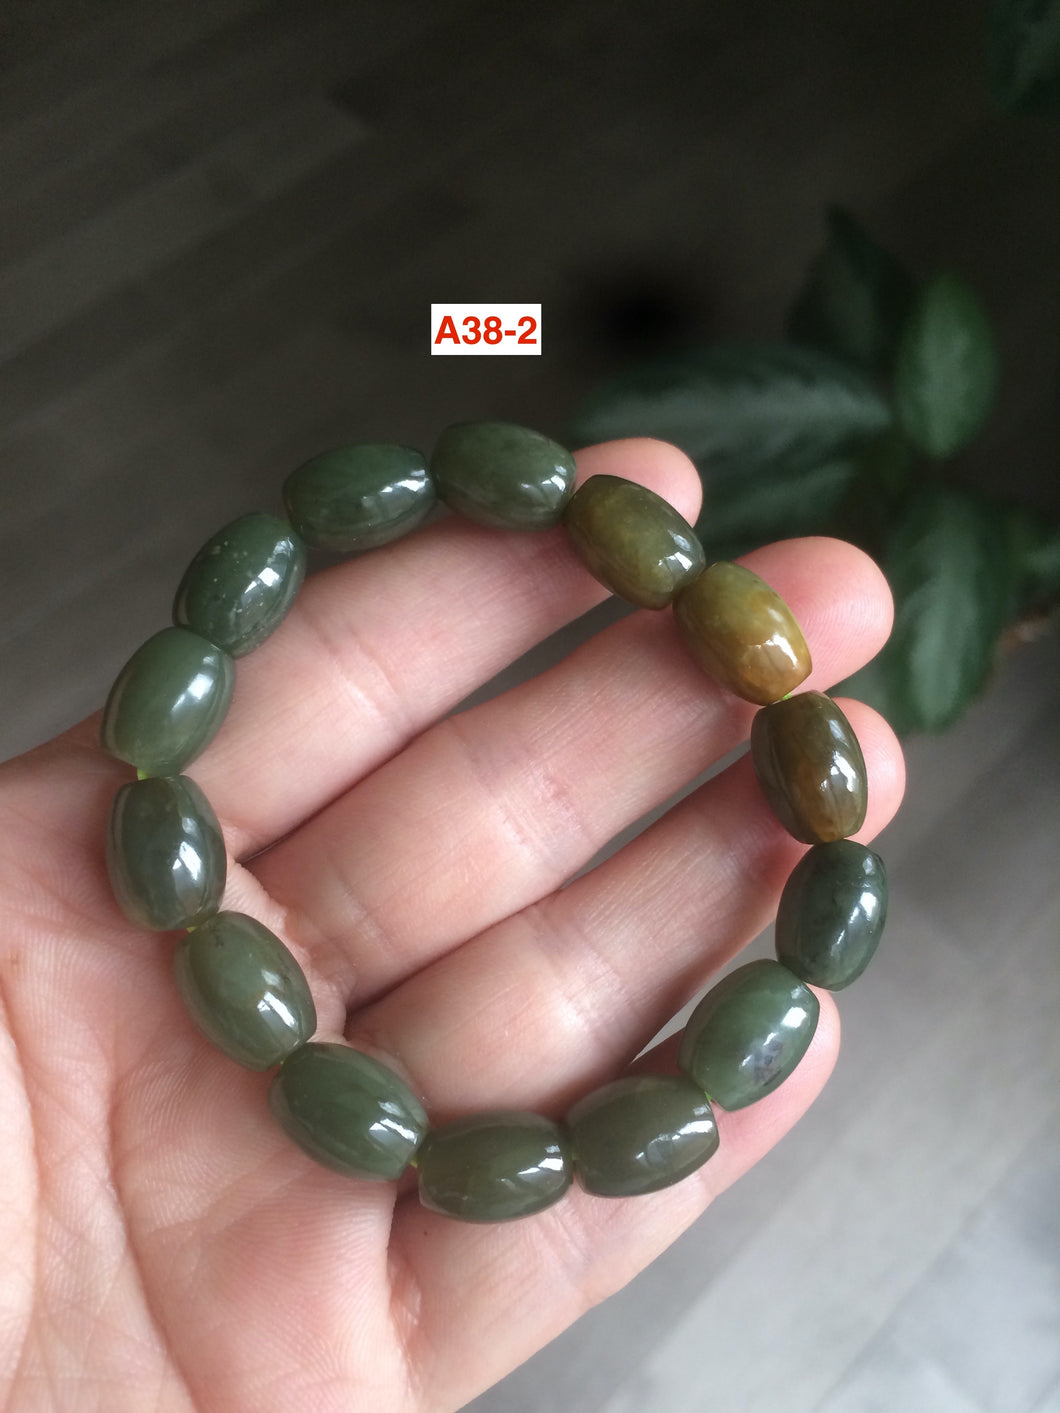 100% Natural 12x9mm green/yellow olives shape seed material(籽料) Hetian Jade bead bracelet A38 (河磨玉，和田玉籽料)